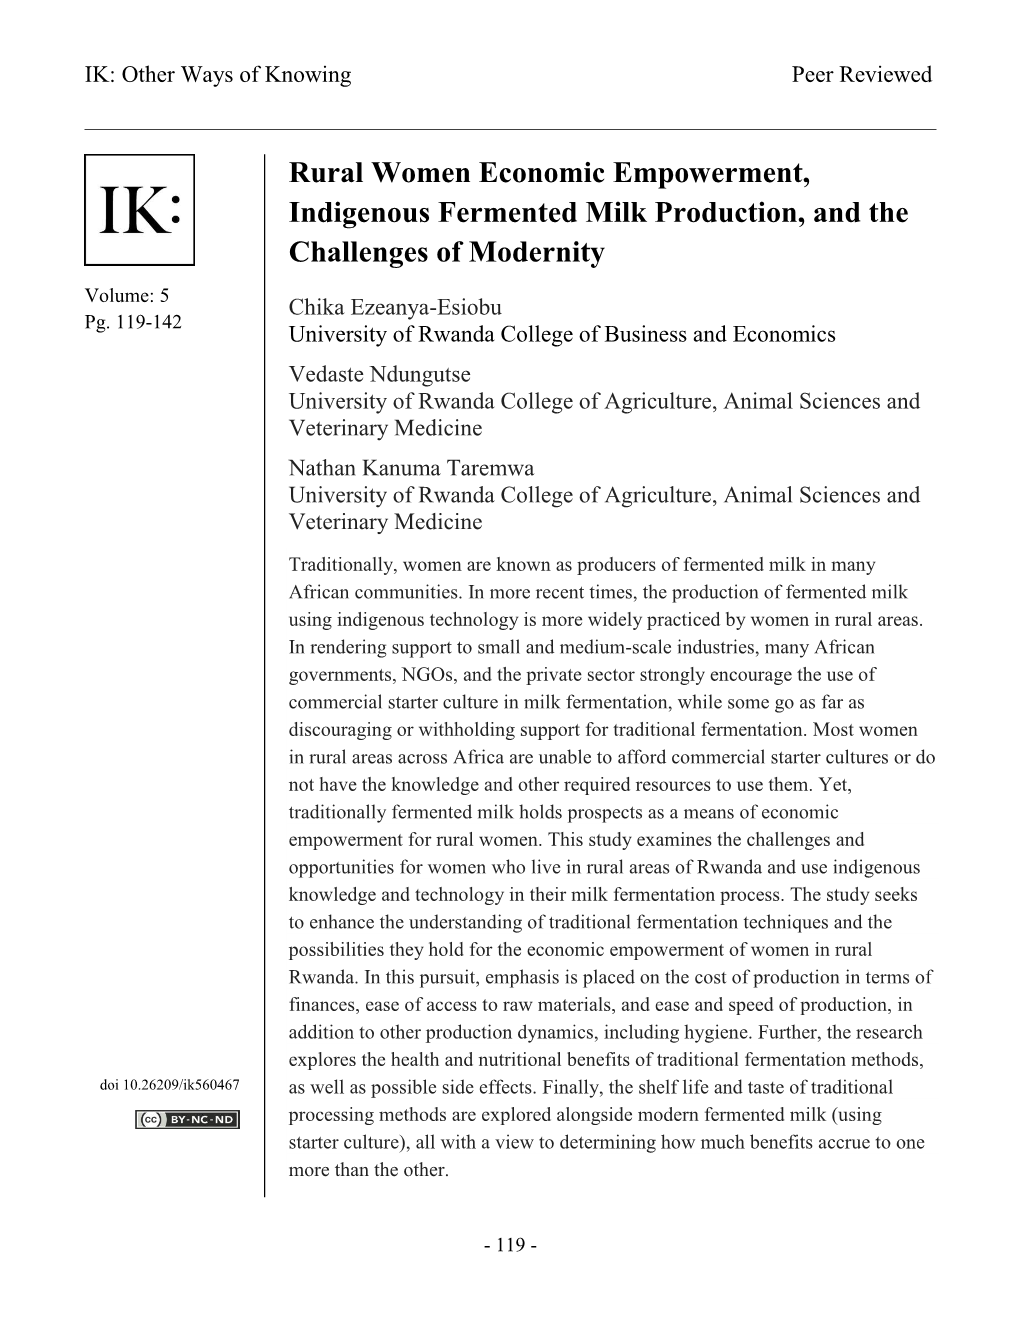 Rural Women Economic Empowerment, Indigenous Fermented Milk Production, and the Challenges of Modernity